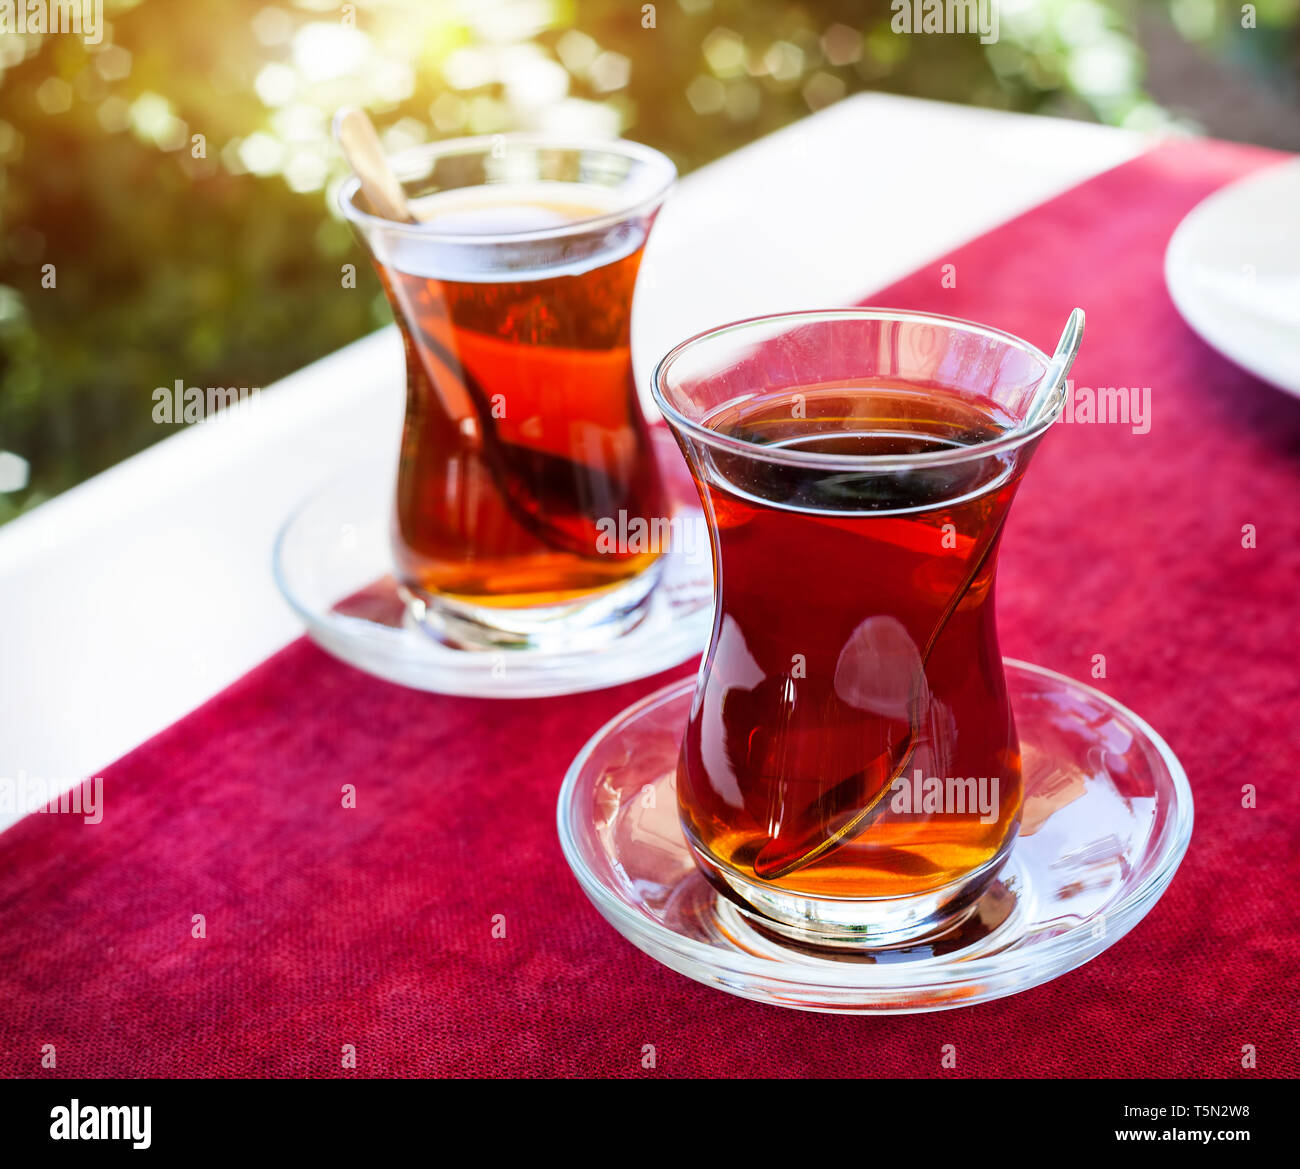 Turkish Tea In Traditional Glasses On Table Traditional Turkish